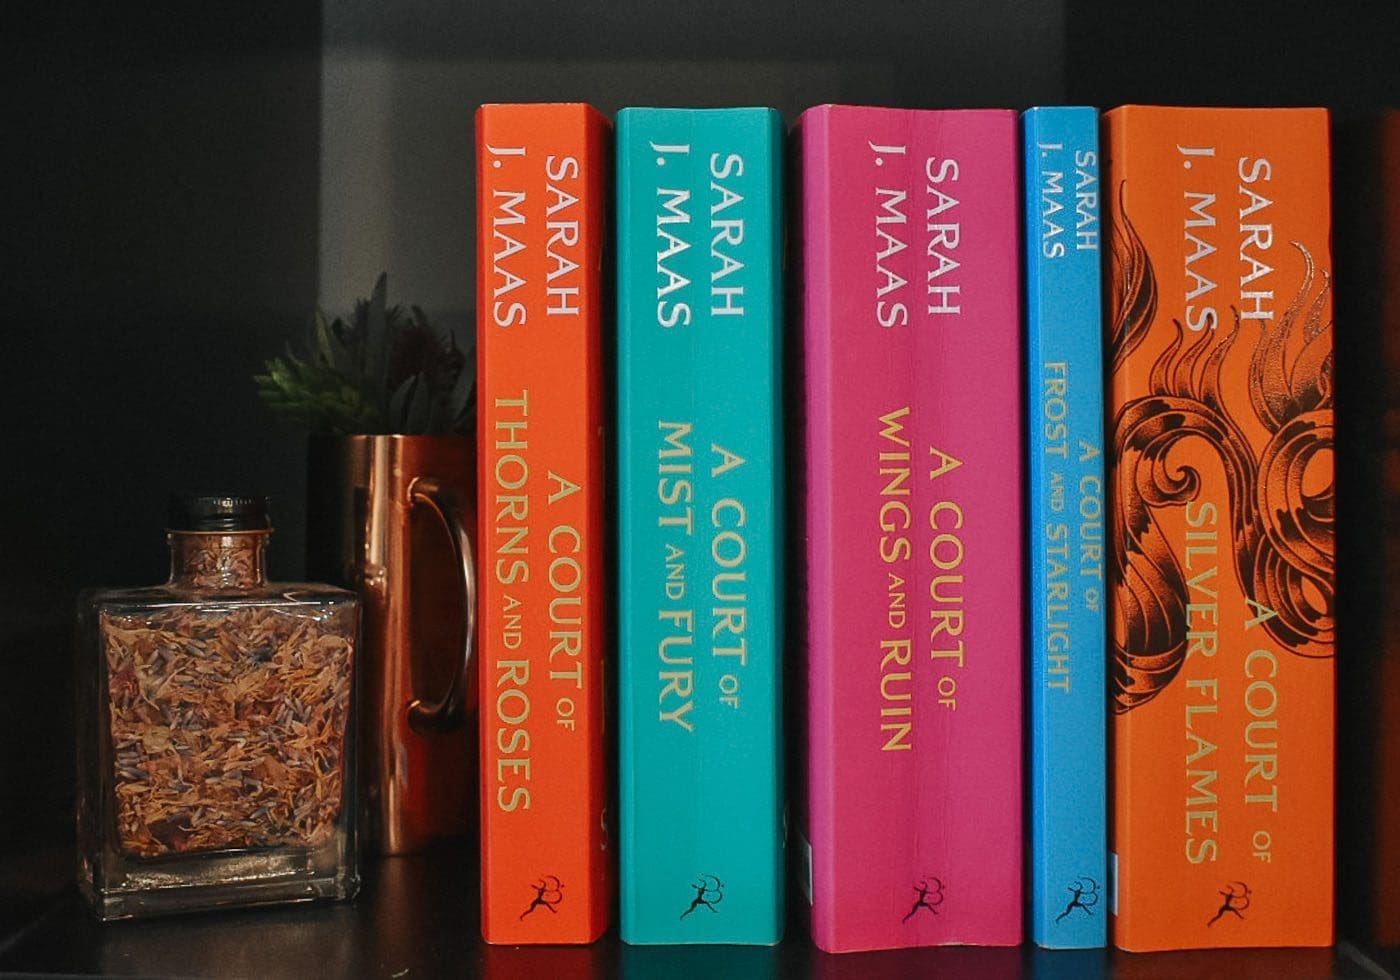 ACOTAR FAQ  A Court of Thorns and Roses Series by Sarah J. Maas